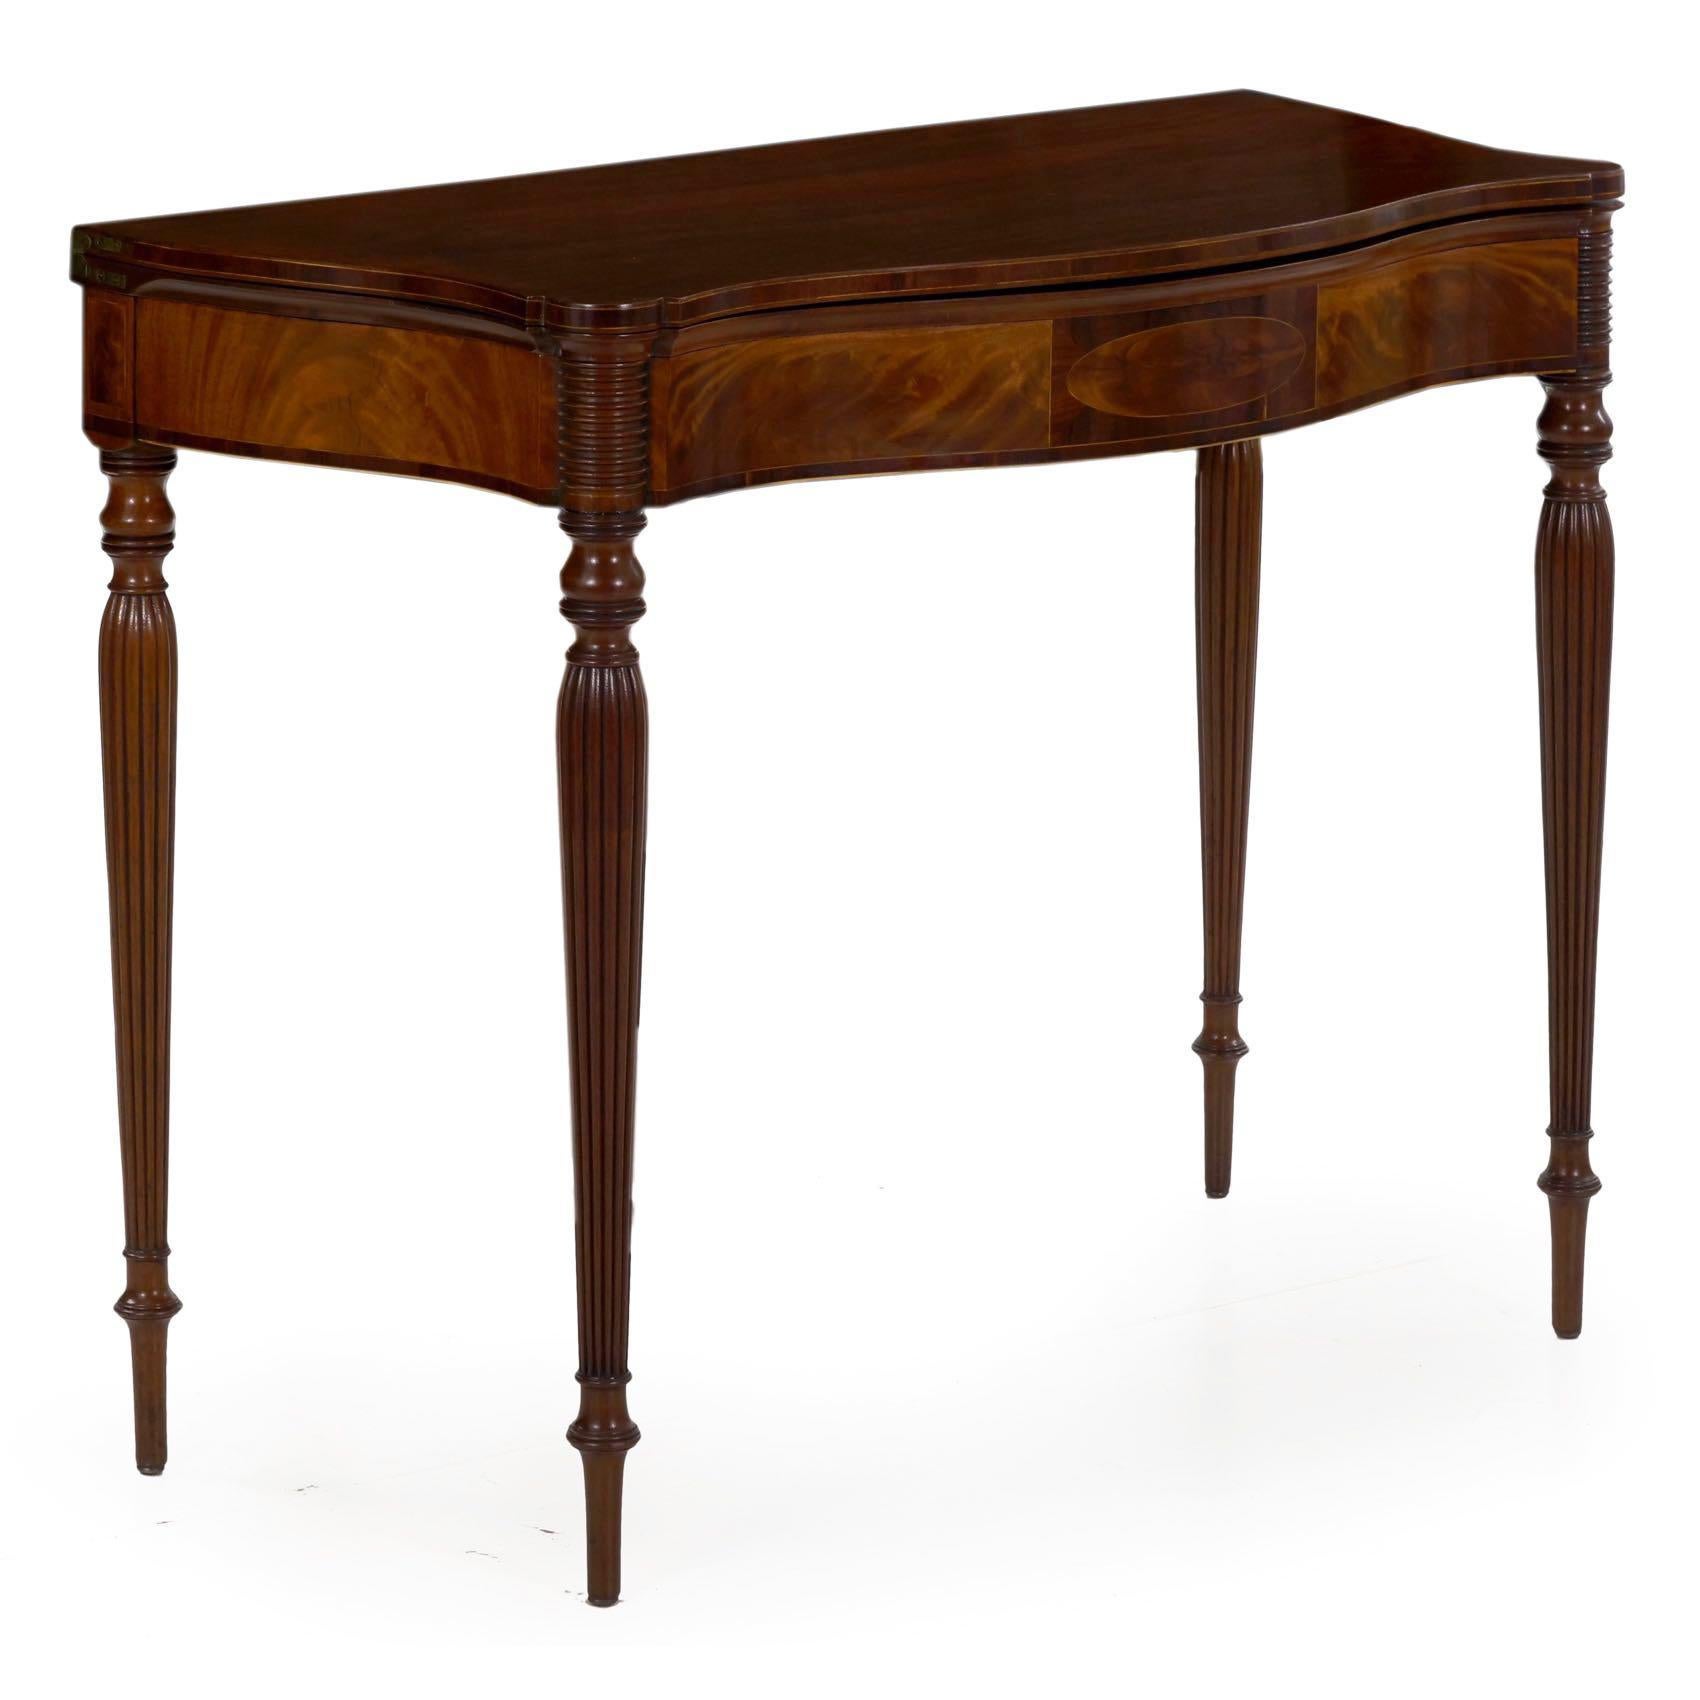 A very fine Sheraton card table from the first quarter of the 19th century, it features a fine serpentine form that is most exaggerated, the front with a cupid's bow curvature that follows through in the undulating sides. This is only seen when the